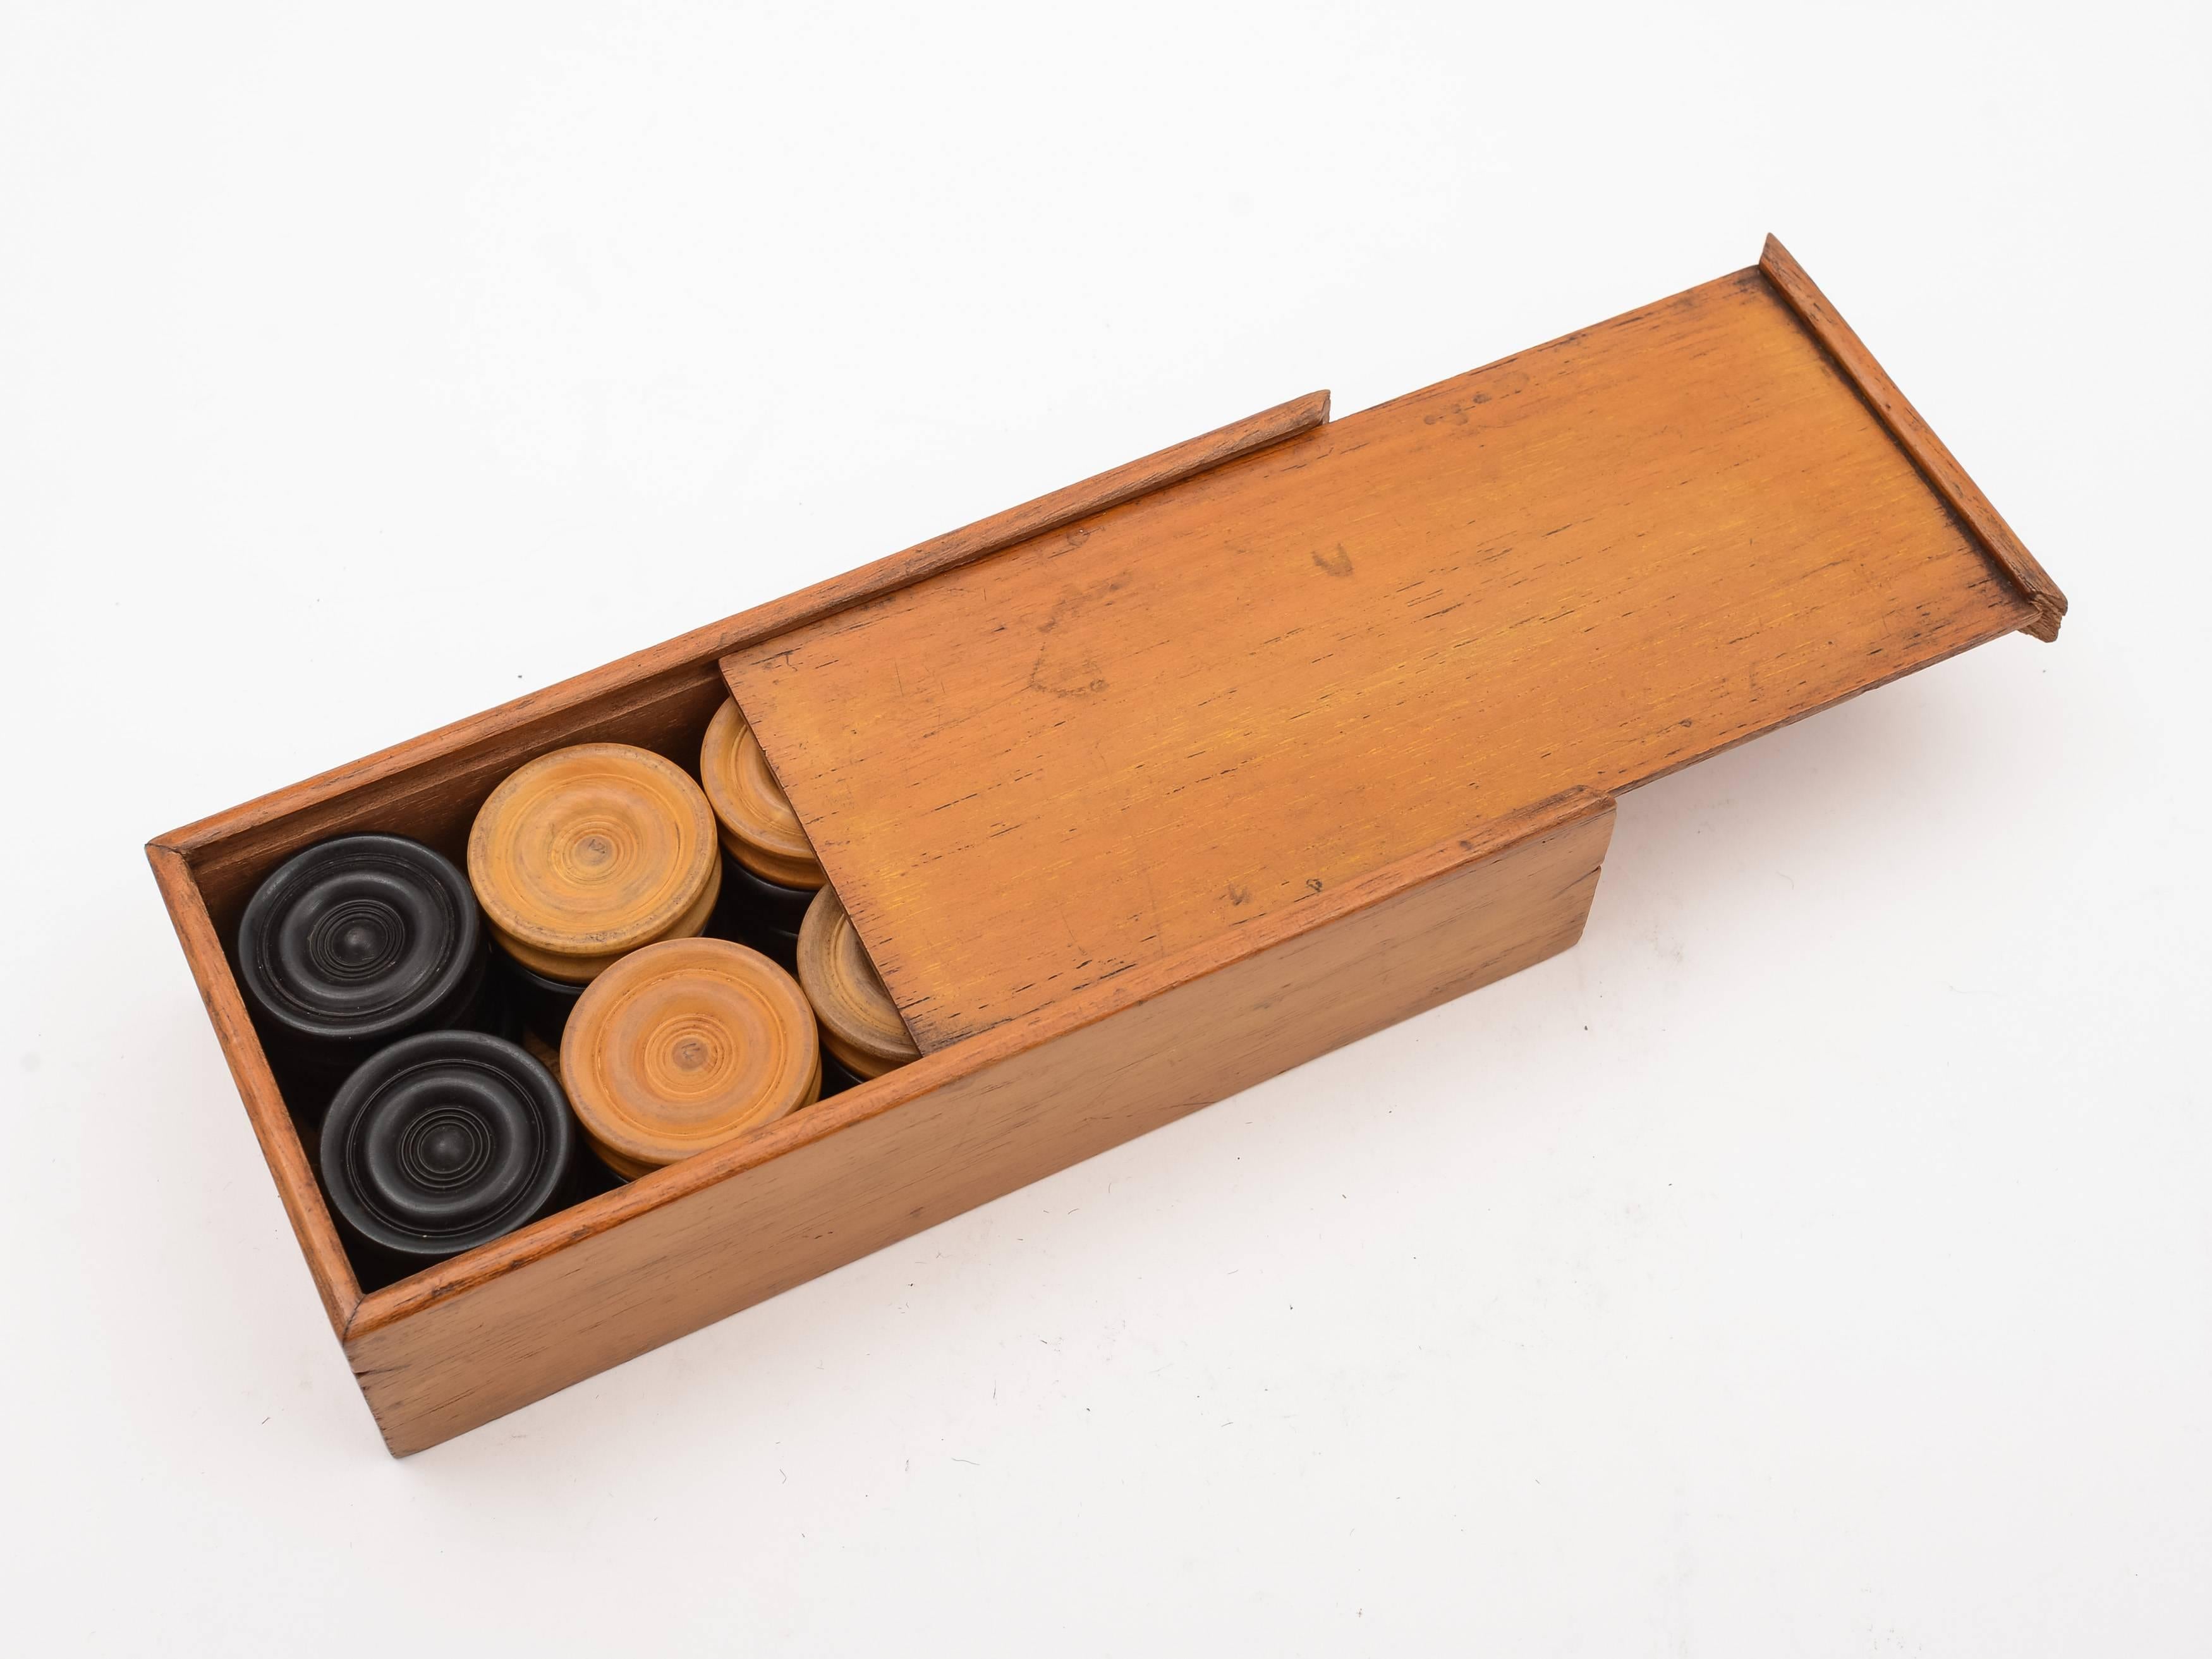 A good cased English Edwardian draughts/backgammon counters in ebony and boxwood and presented in original wooden box with sliding lid, circa 1905.

 

Measurements:
Counter height 1/2